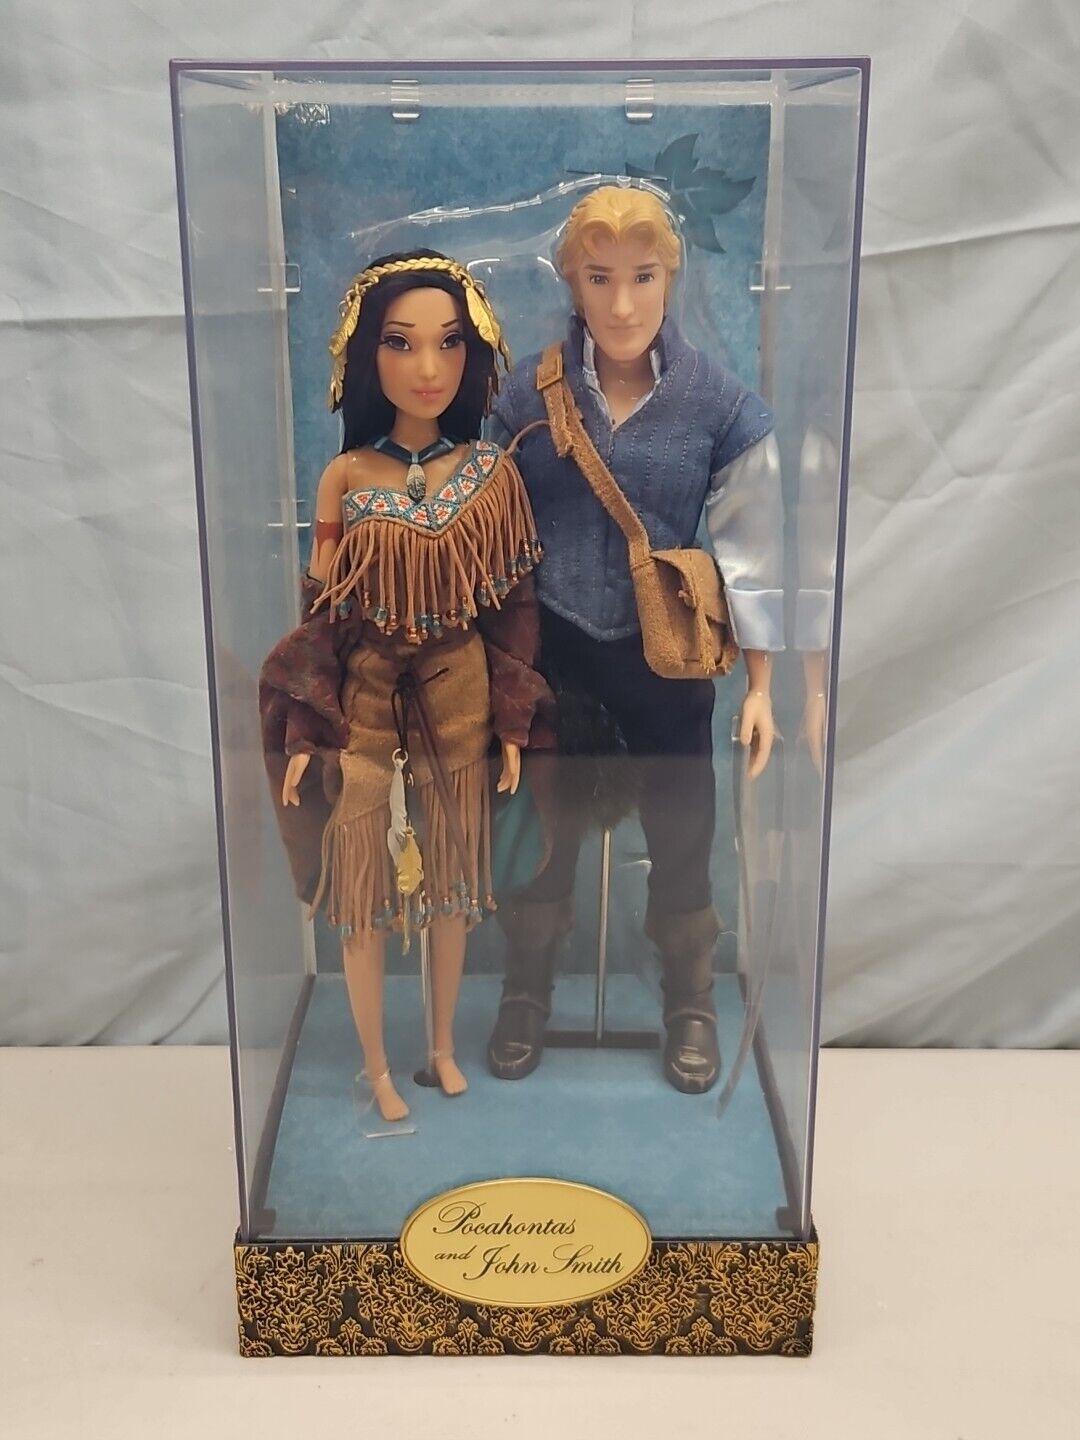 Disney Designer Fairytale Collection Doll Pocahontas and John Smith Limited 6000